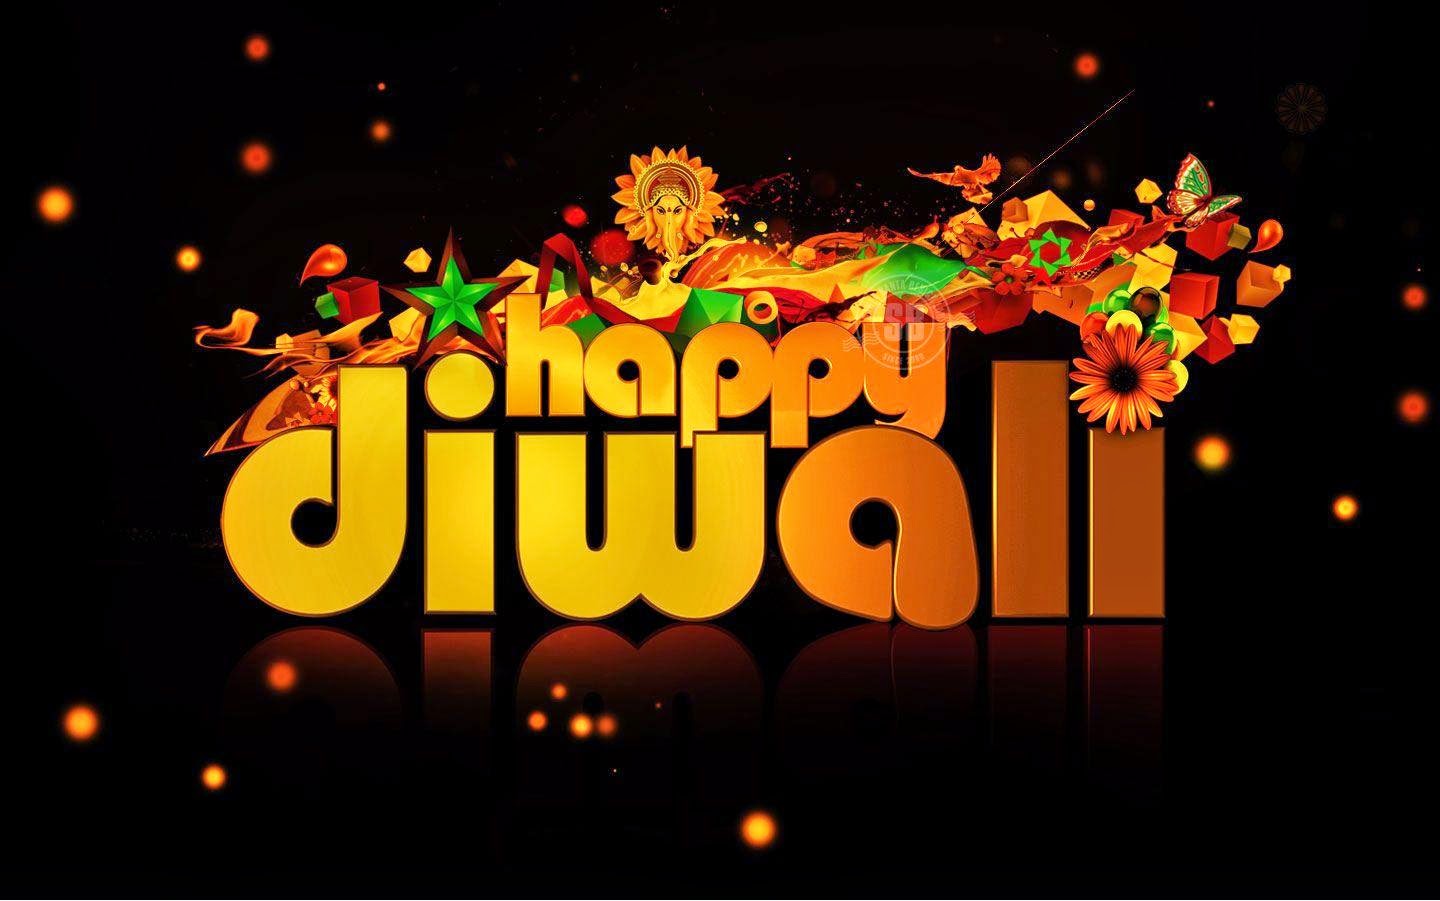 Happy Diwali 2014 Images and Wallpapers - Whatsapp, FB 